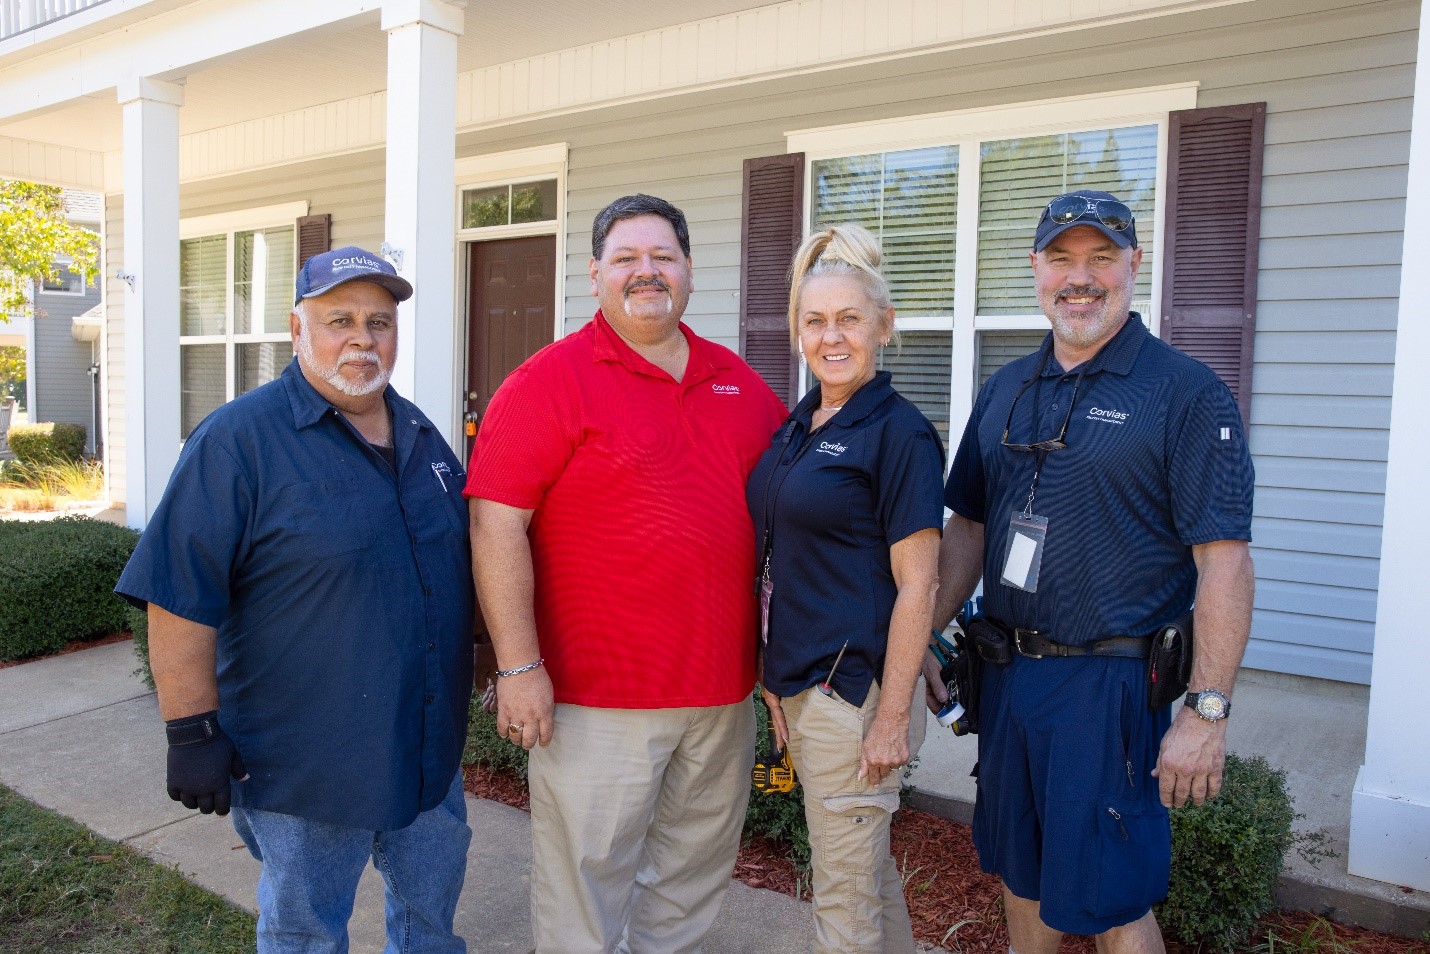 In response to Winter Storm Indigo, the Fort Johnson Corvias Property Management maintenance team worked around the clock to restore all systems to full functionality.